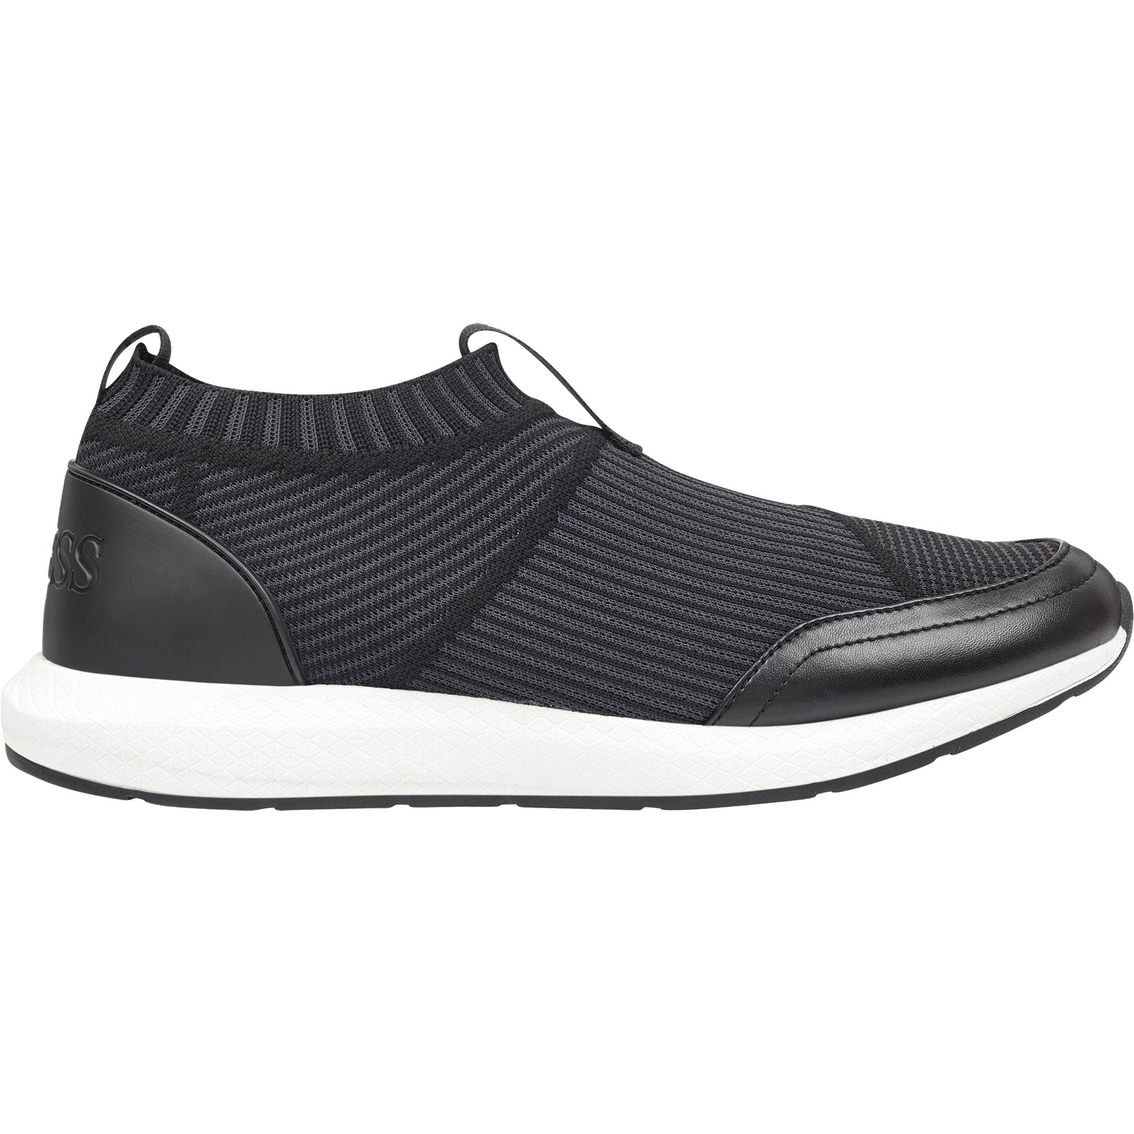 Guess Zoid Slip On Athletic Shoes | Sneakers | Shoes | Shop The Exchange